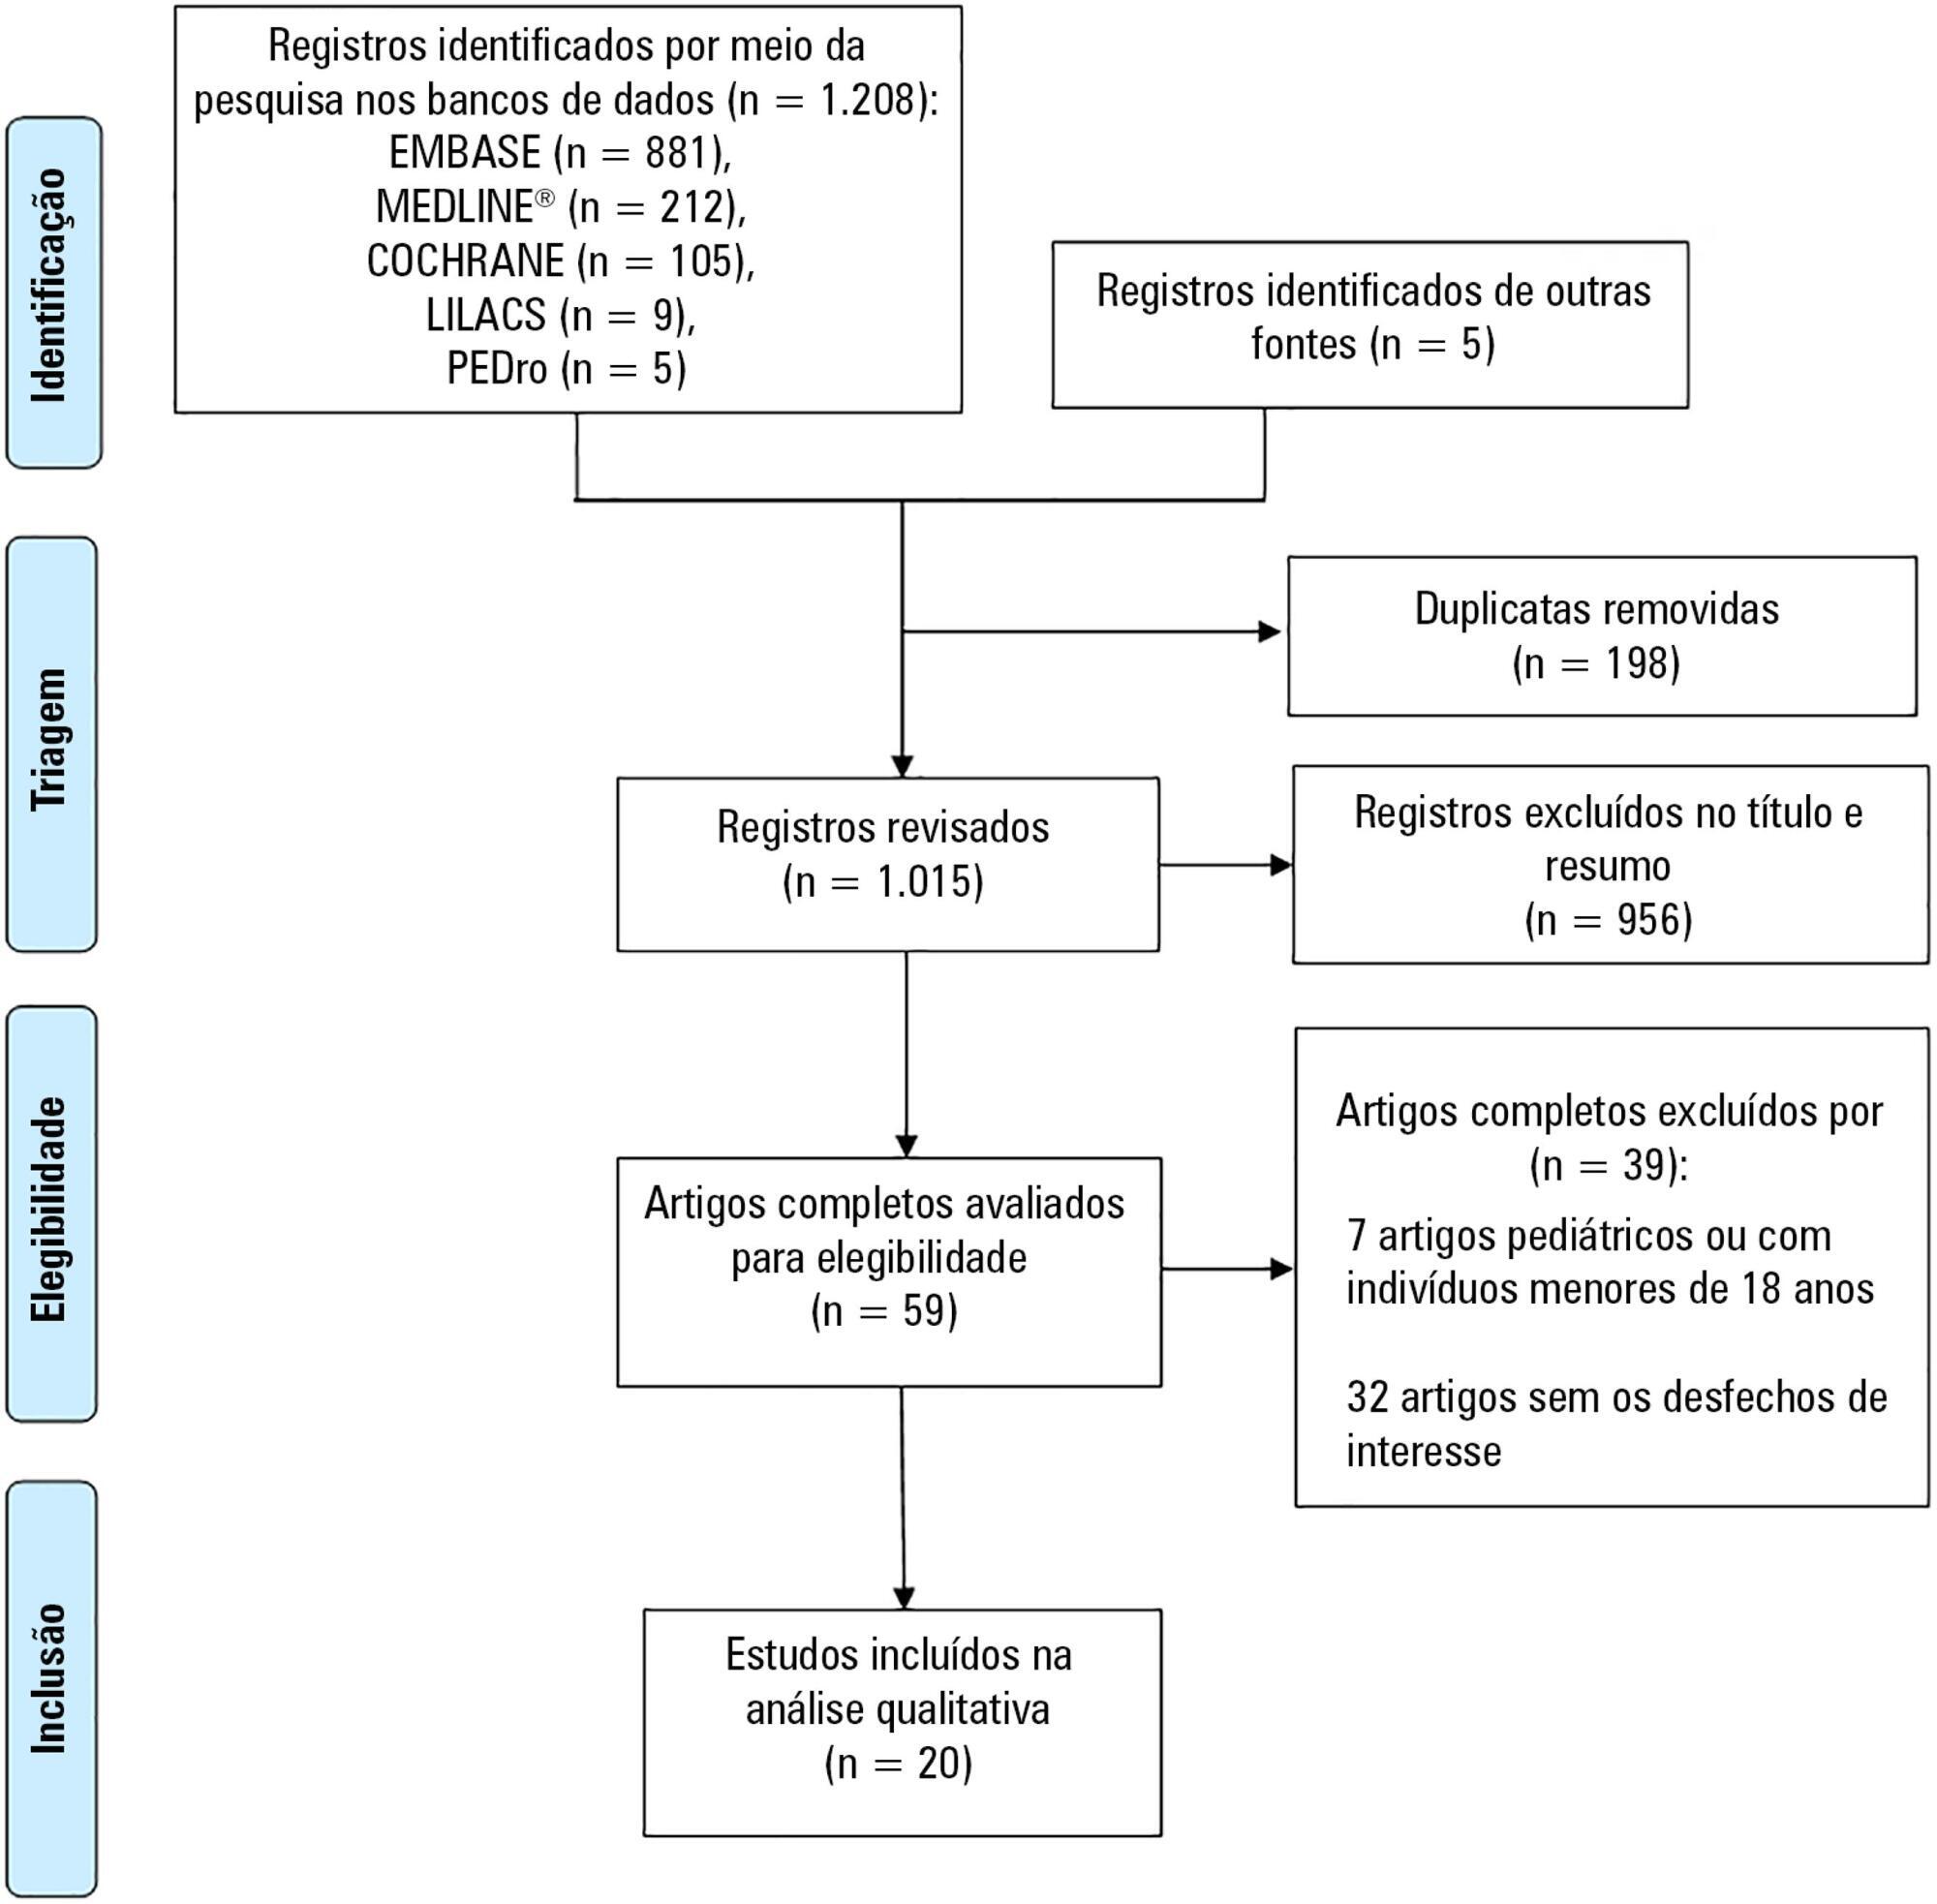 Safety and potential benefits of physical therapy in adult patients on extracorporeal membrane oxygenation support: a systematic review